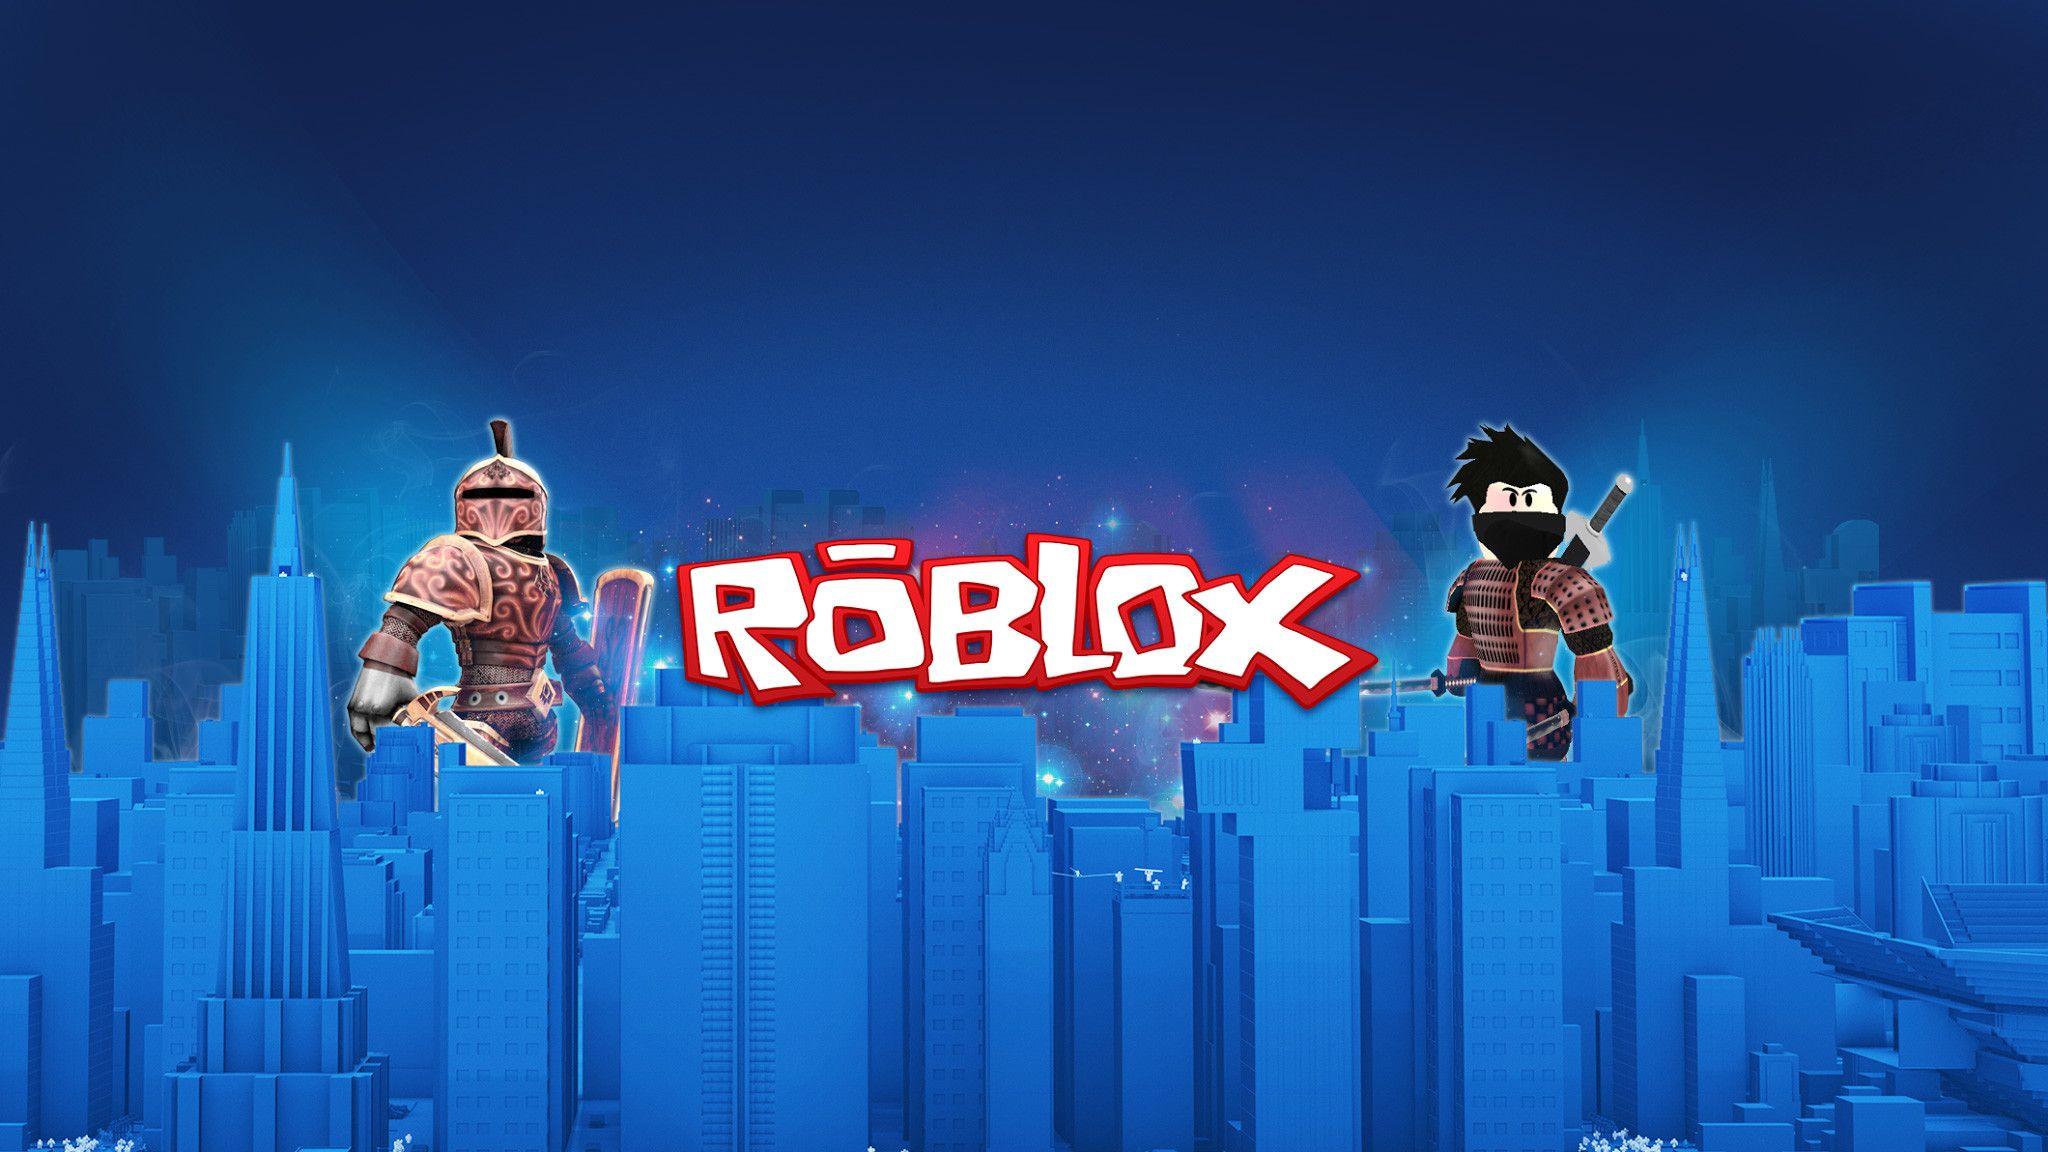 Cute Roblox Wallpapers Top Free Cute Roblox Backgrounds Wallpaperaccess - stylish wallpapers for roblox